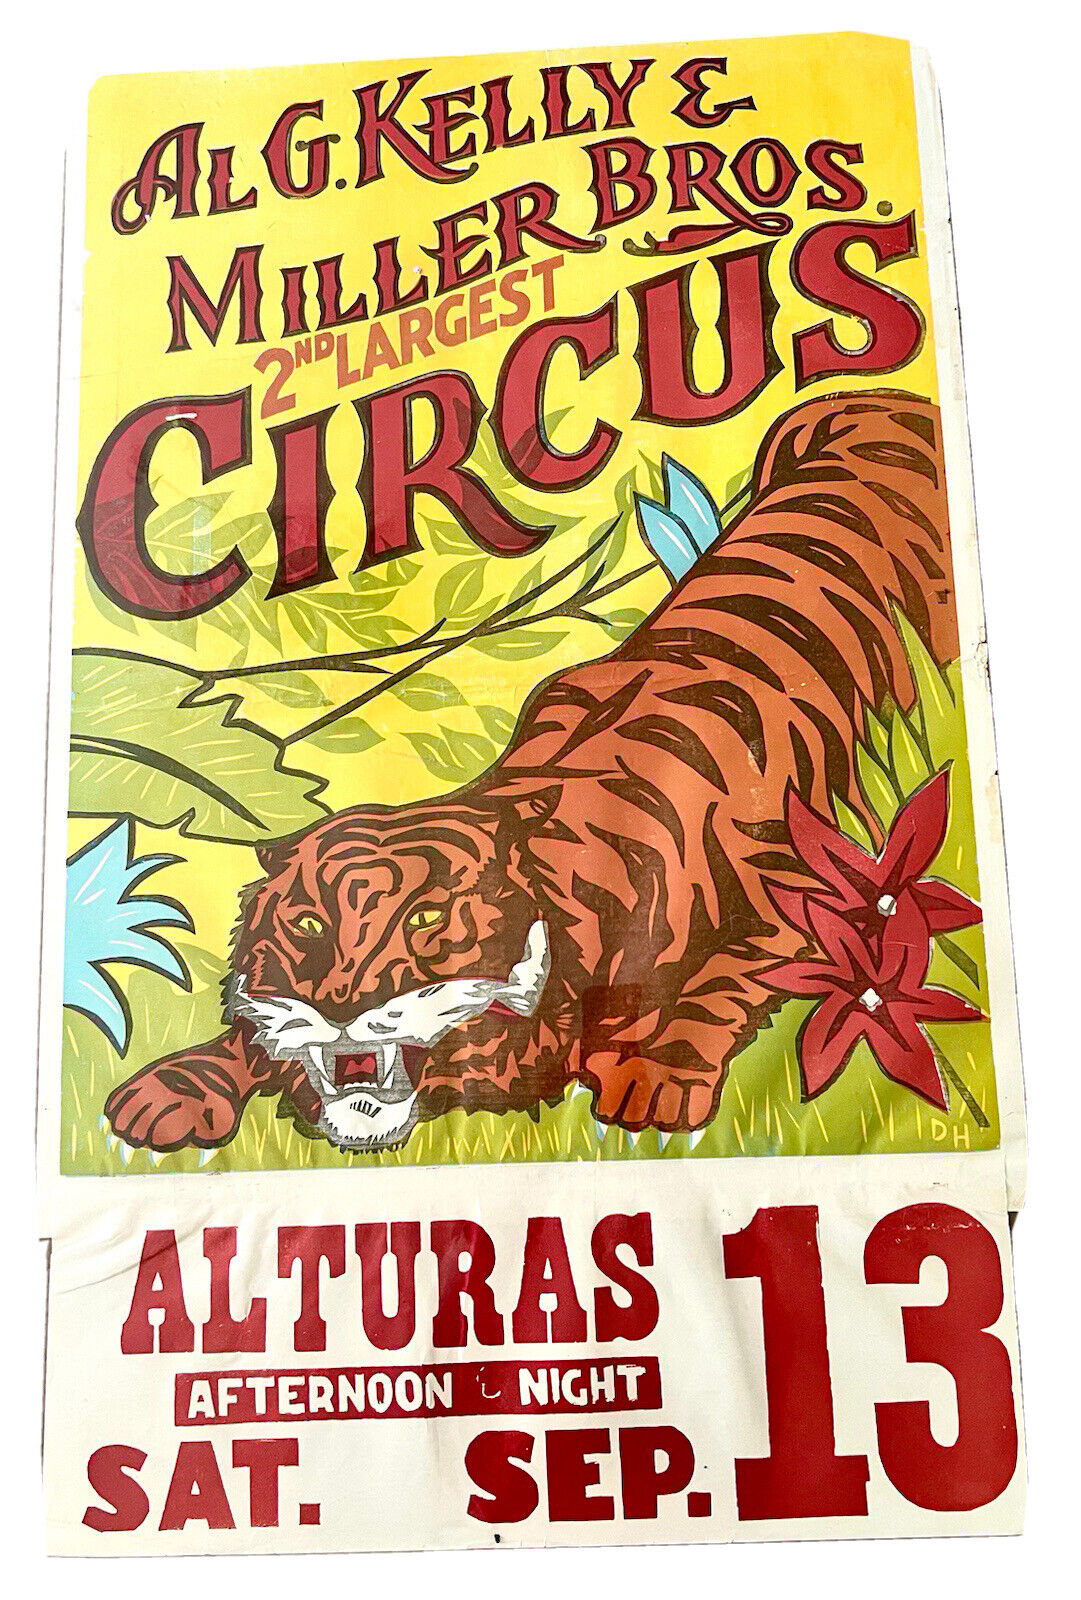 Authentic Vintage 1940s-1950s Al G. Kelly tiger Circus Poster